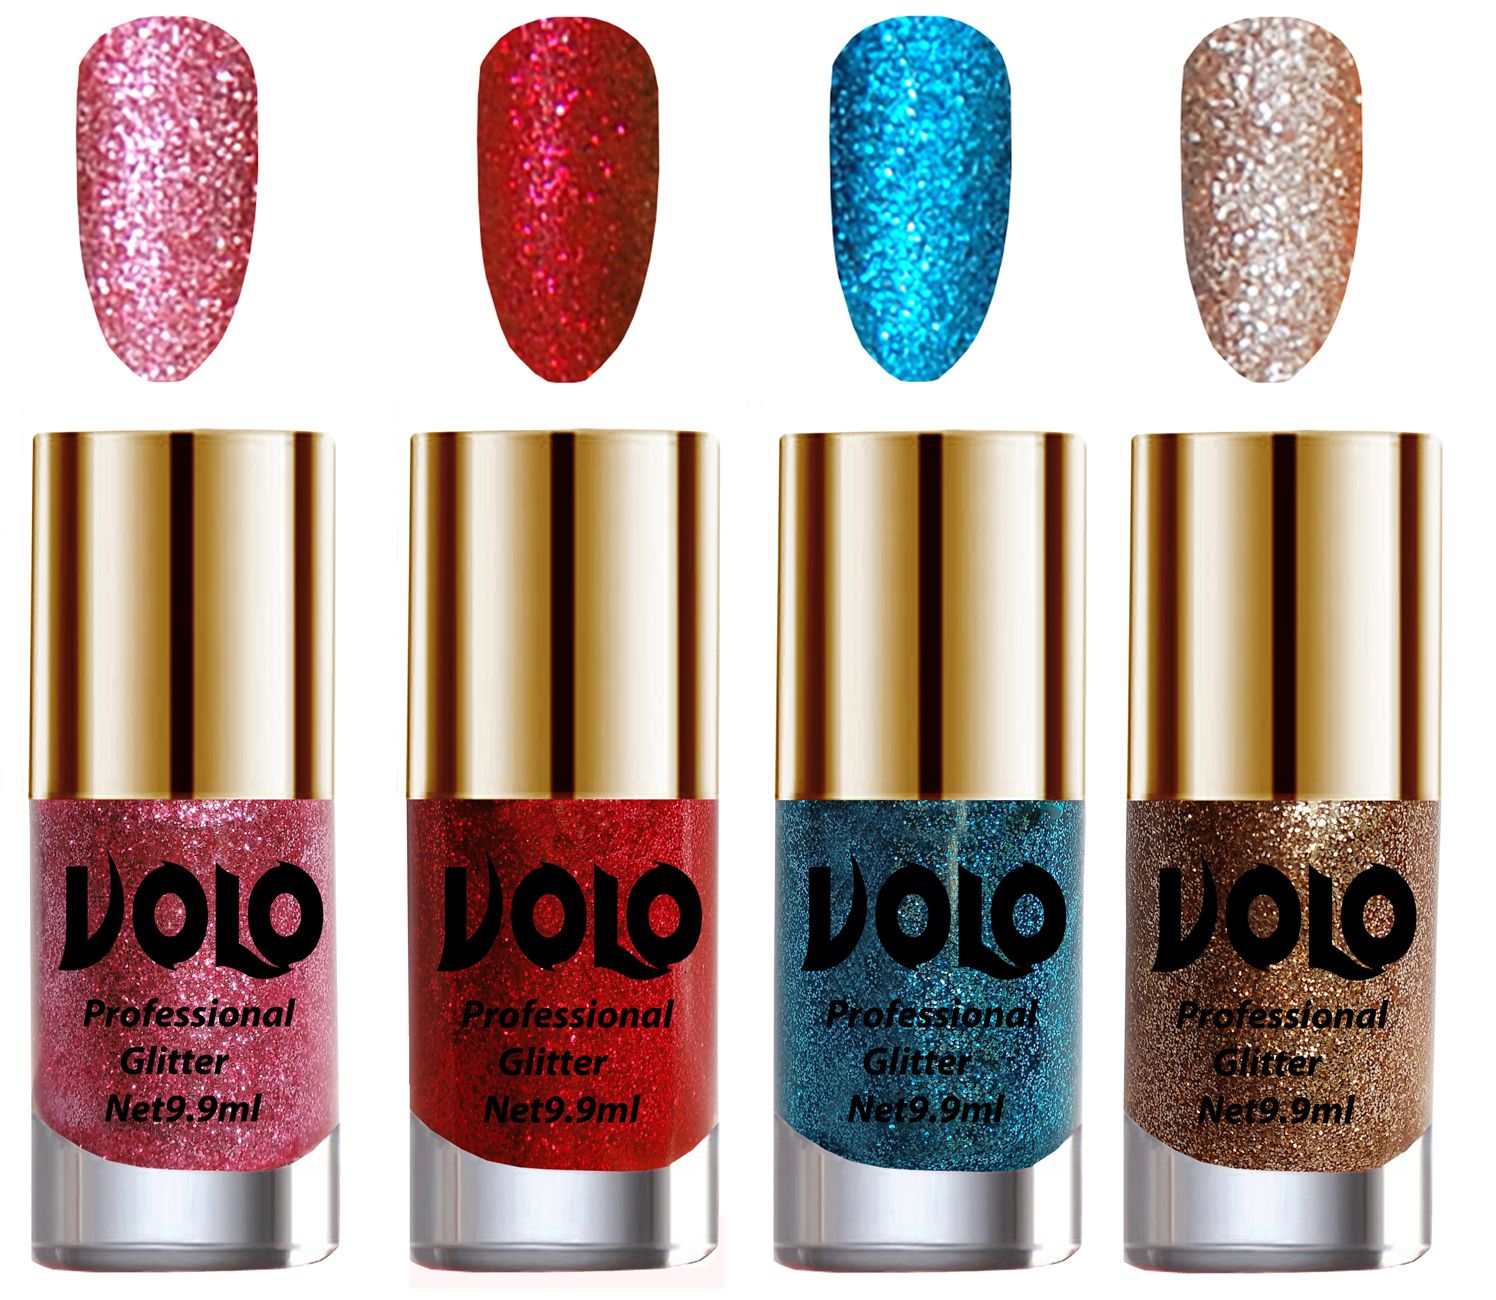     			VOLO Professionally Used Glitter Shine Nail Polish Pink,Red,Blue Gold Pack of 4 39 mL